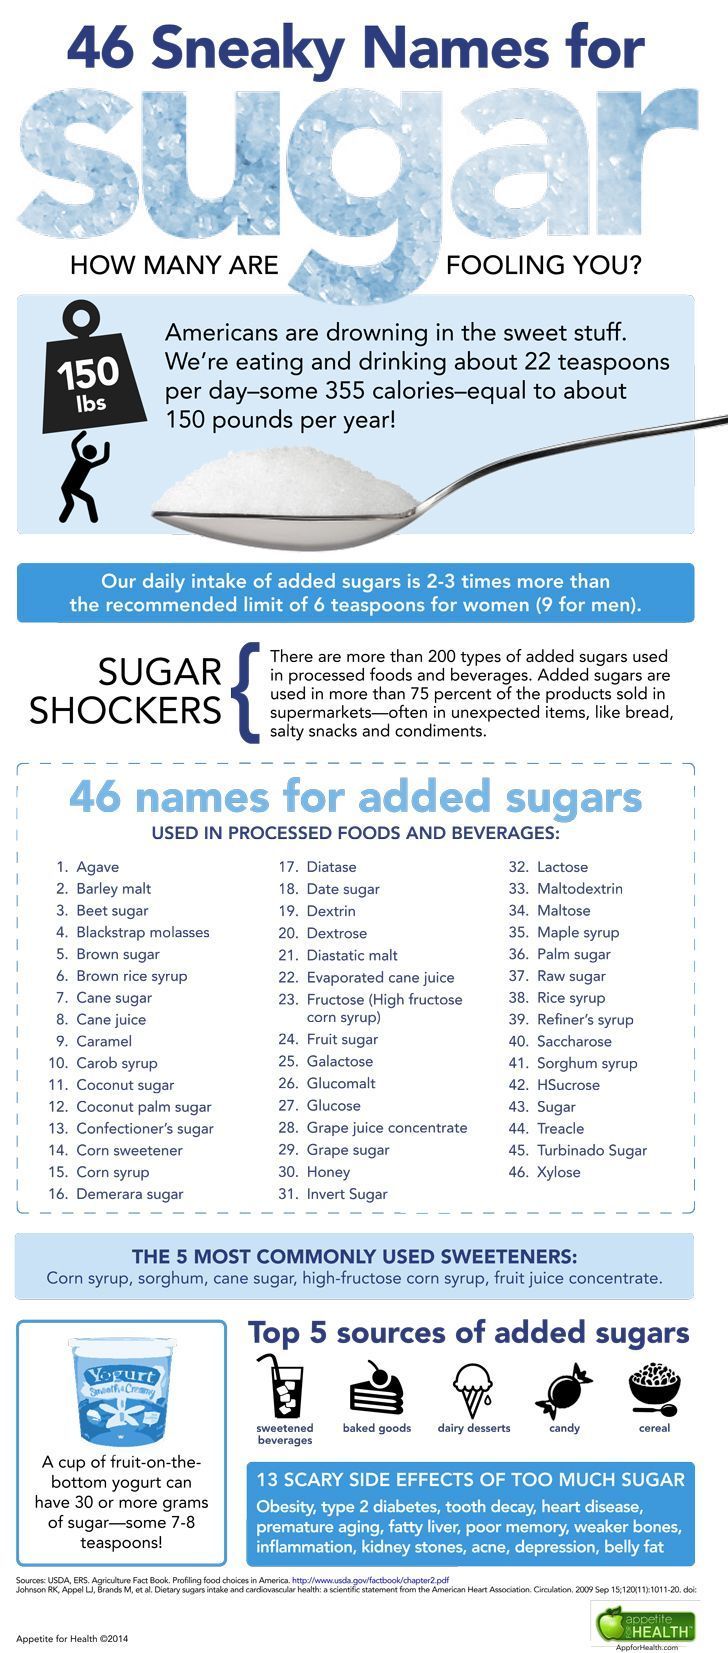 46 ways sugar is hiding in your food. List includes alternate names for sugar